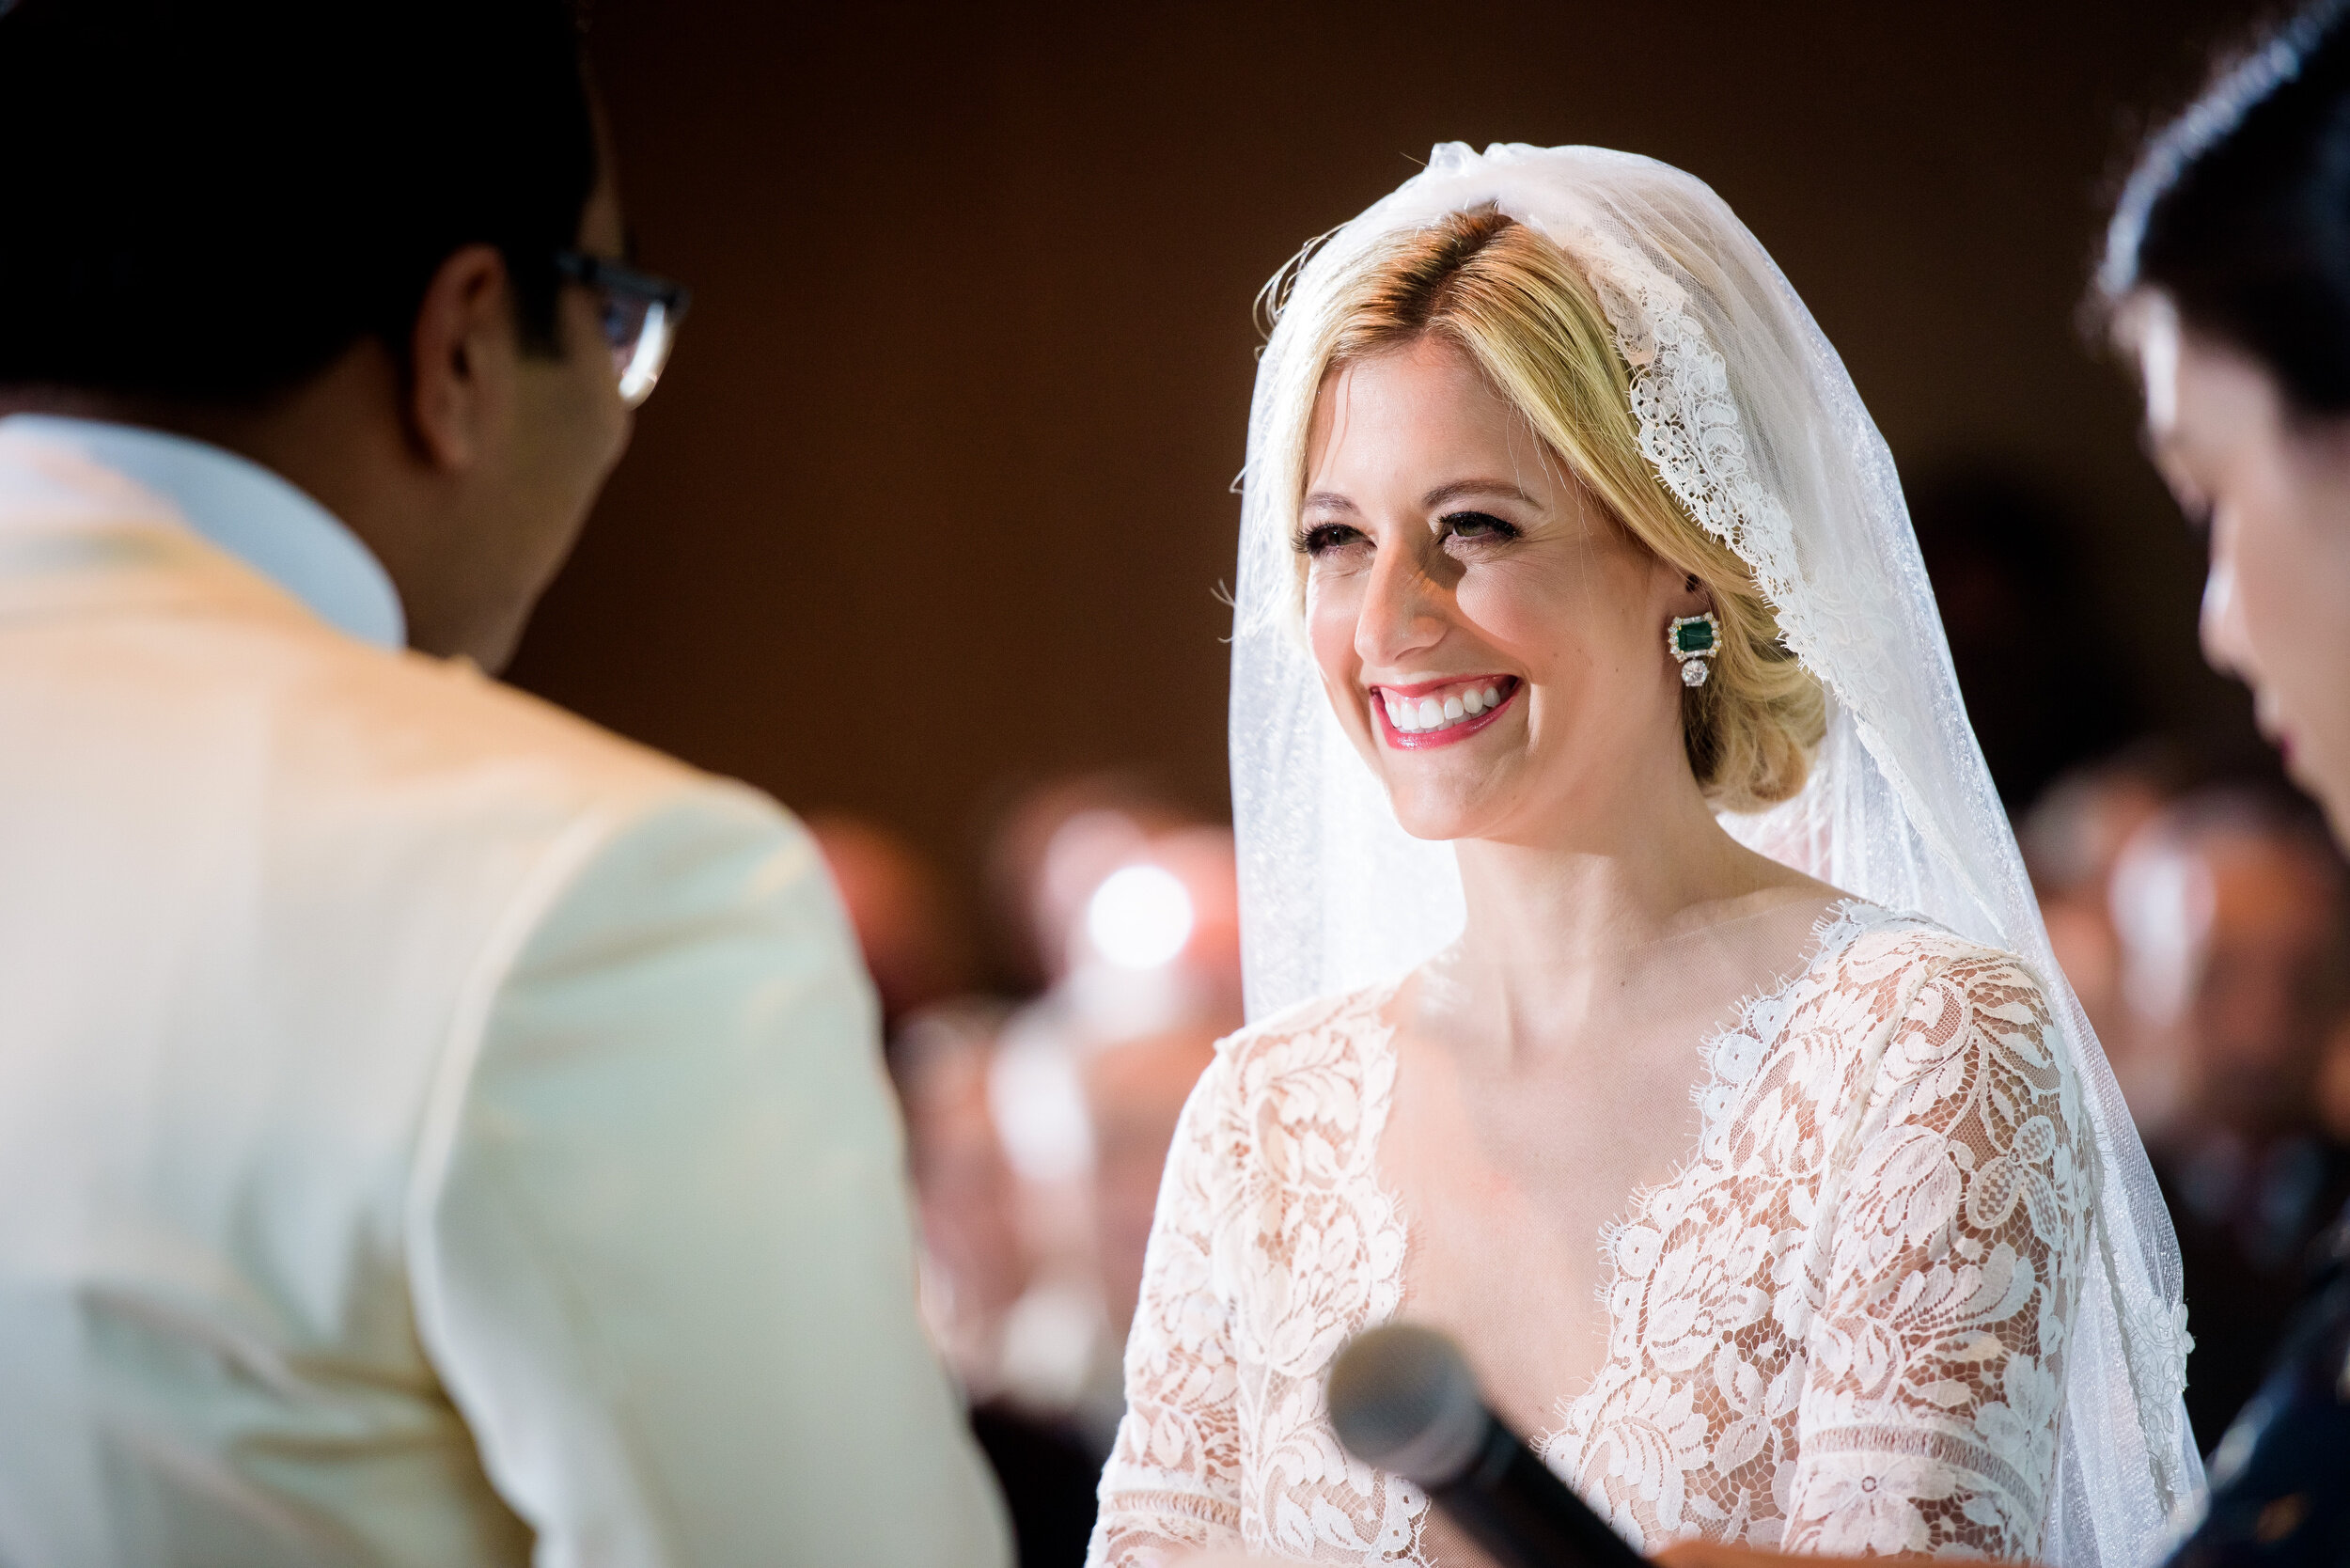 Bride smiles during her wedding ceremony: Geraghty Chicago wedding photography captured by J. Brown Photography.